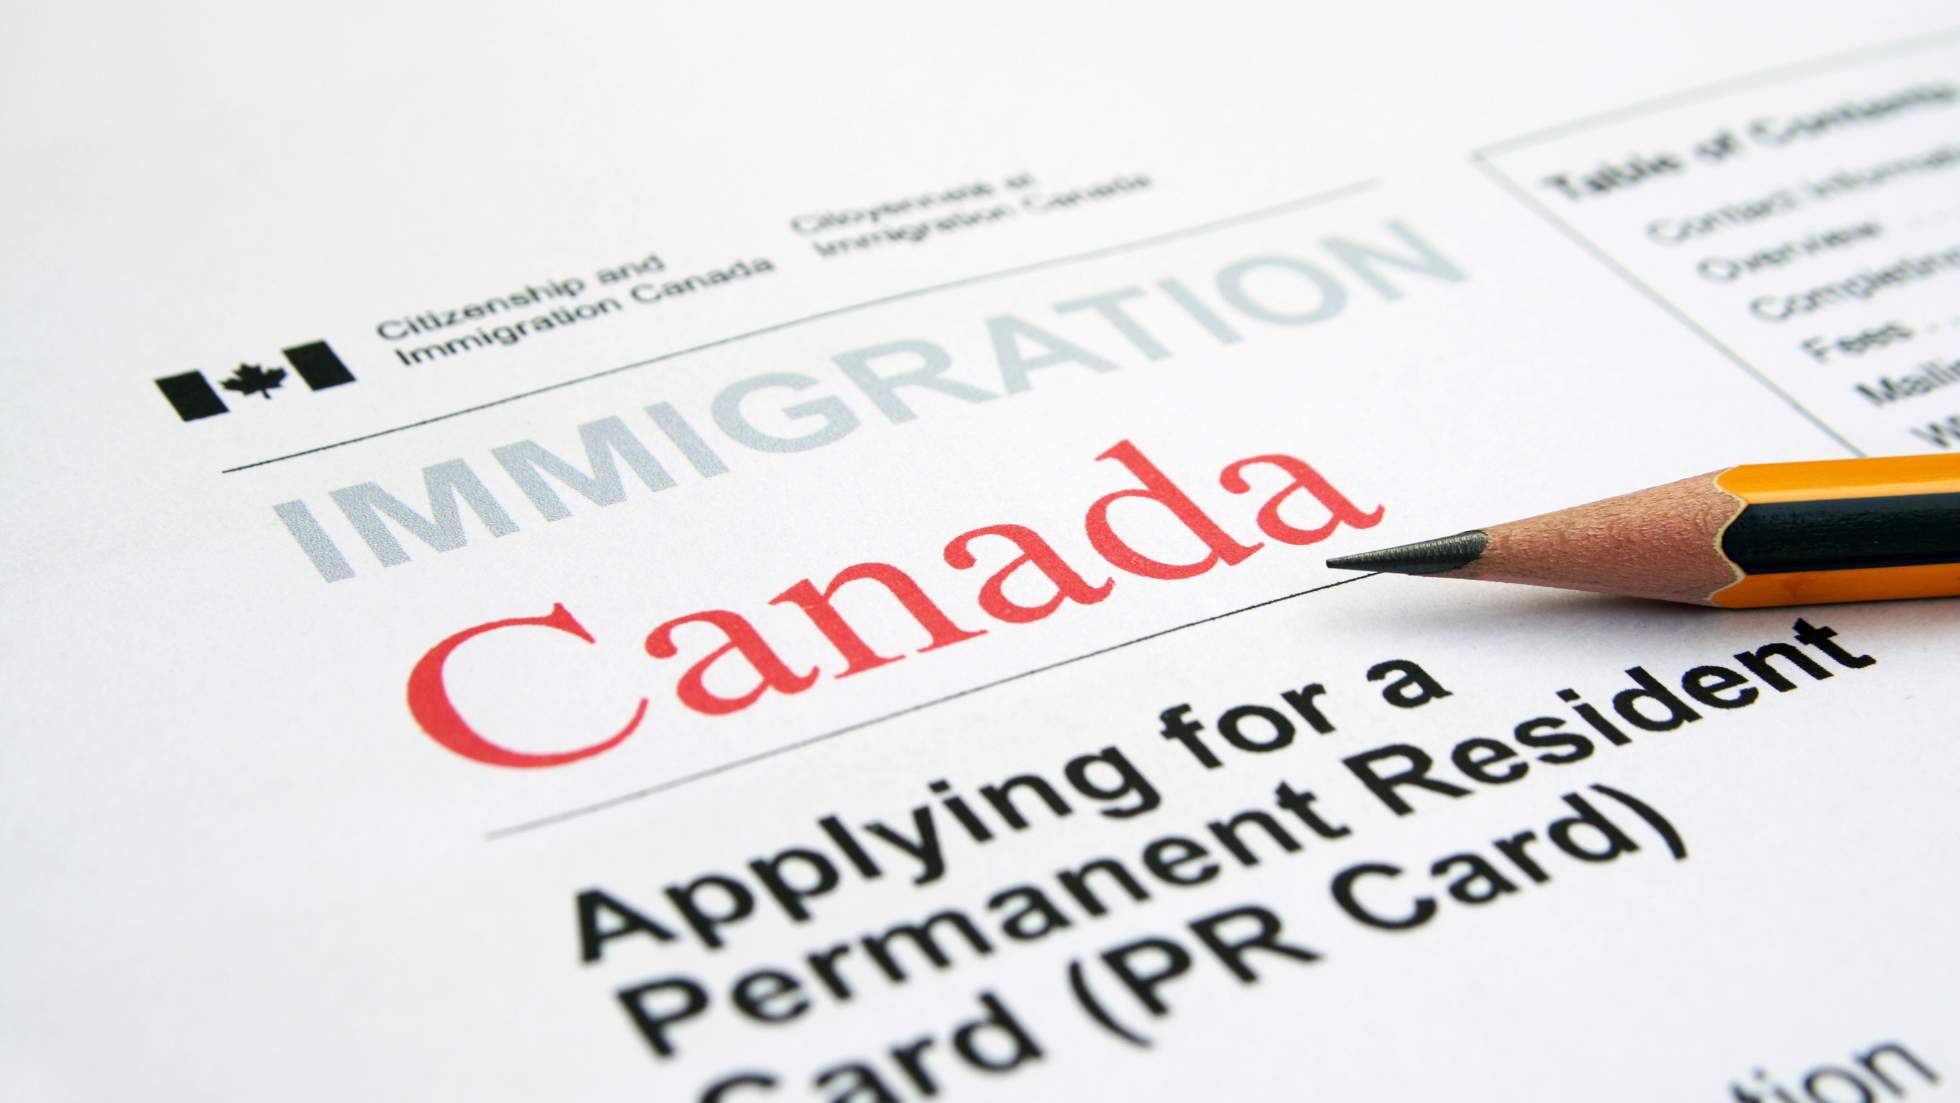 How do you get Canadian documents ready for international use?